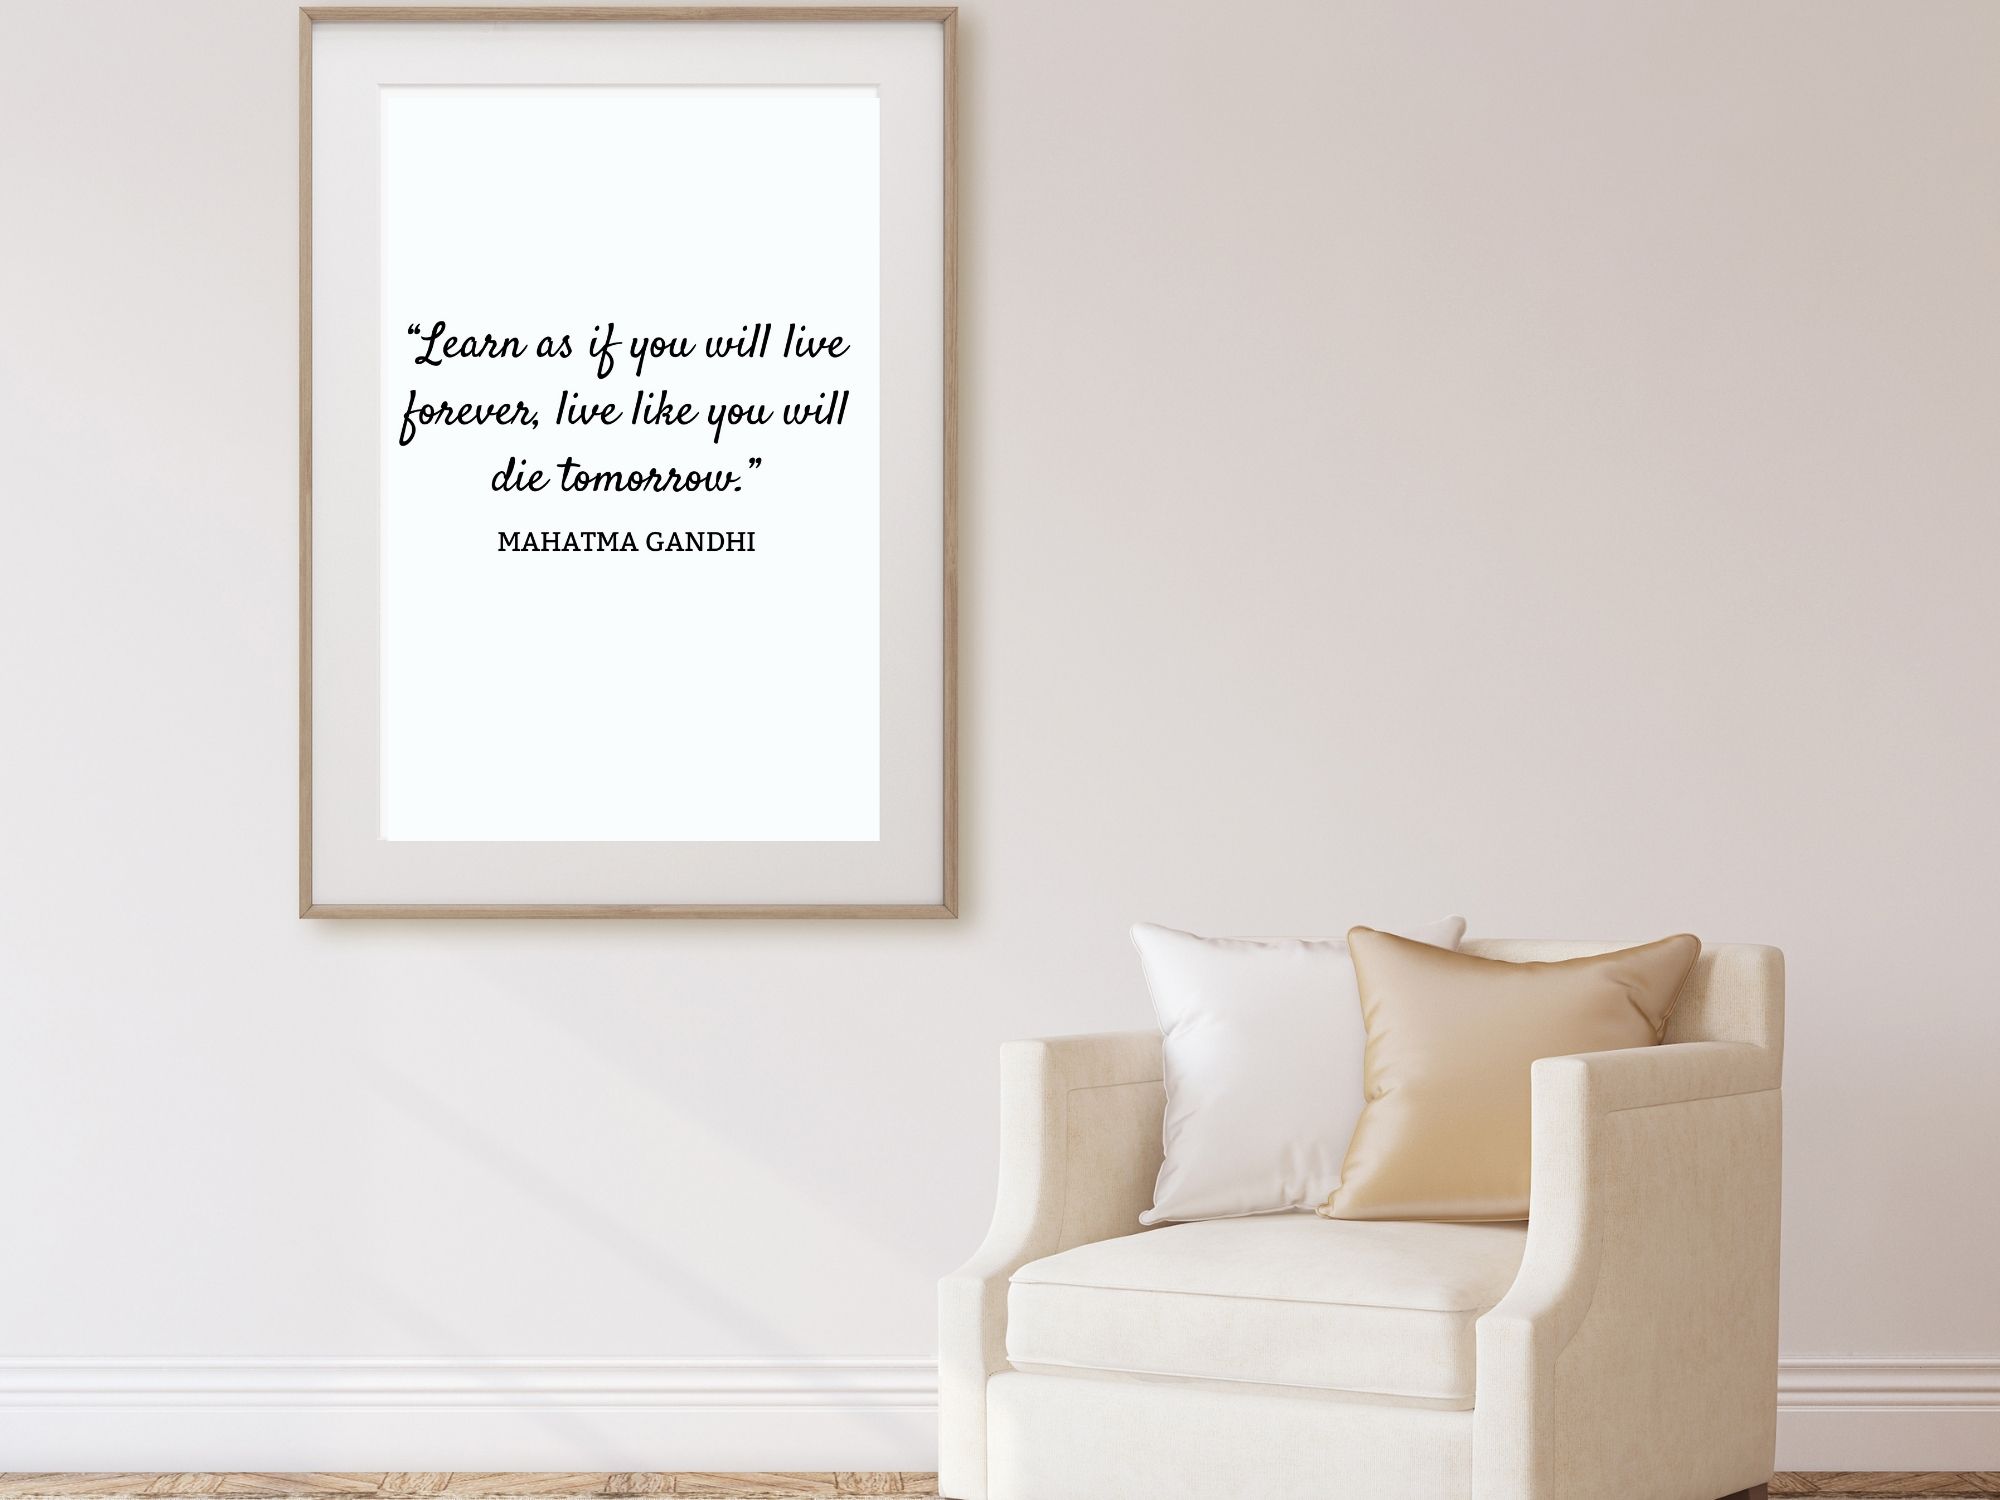  Mahatma Gandhi - Live As If You Were to Die Tomorrow - Classic Book  Pages Wall Decor, Inspirational and Motivational Life Famous Quote Gift,  11x14 Unframed Typography Art Print Vintage Poster 